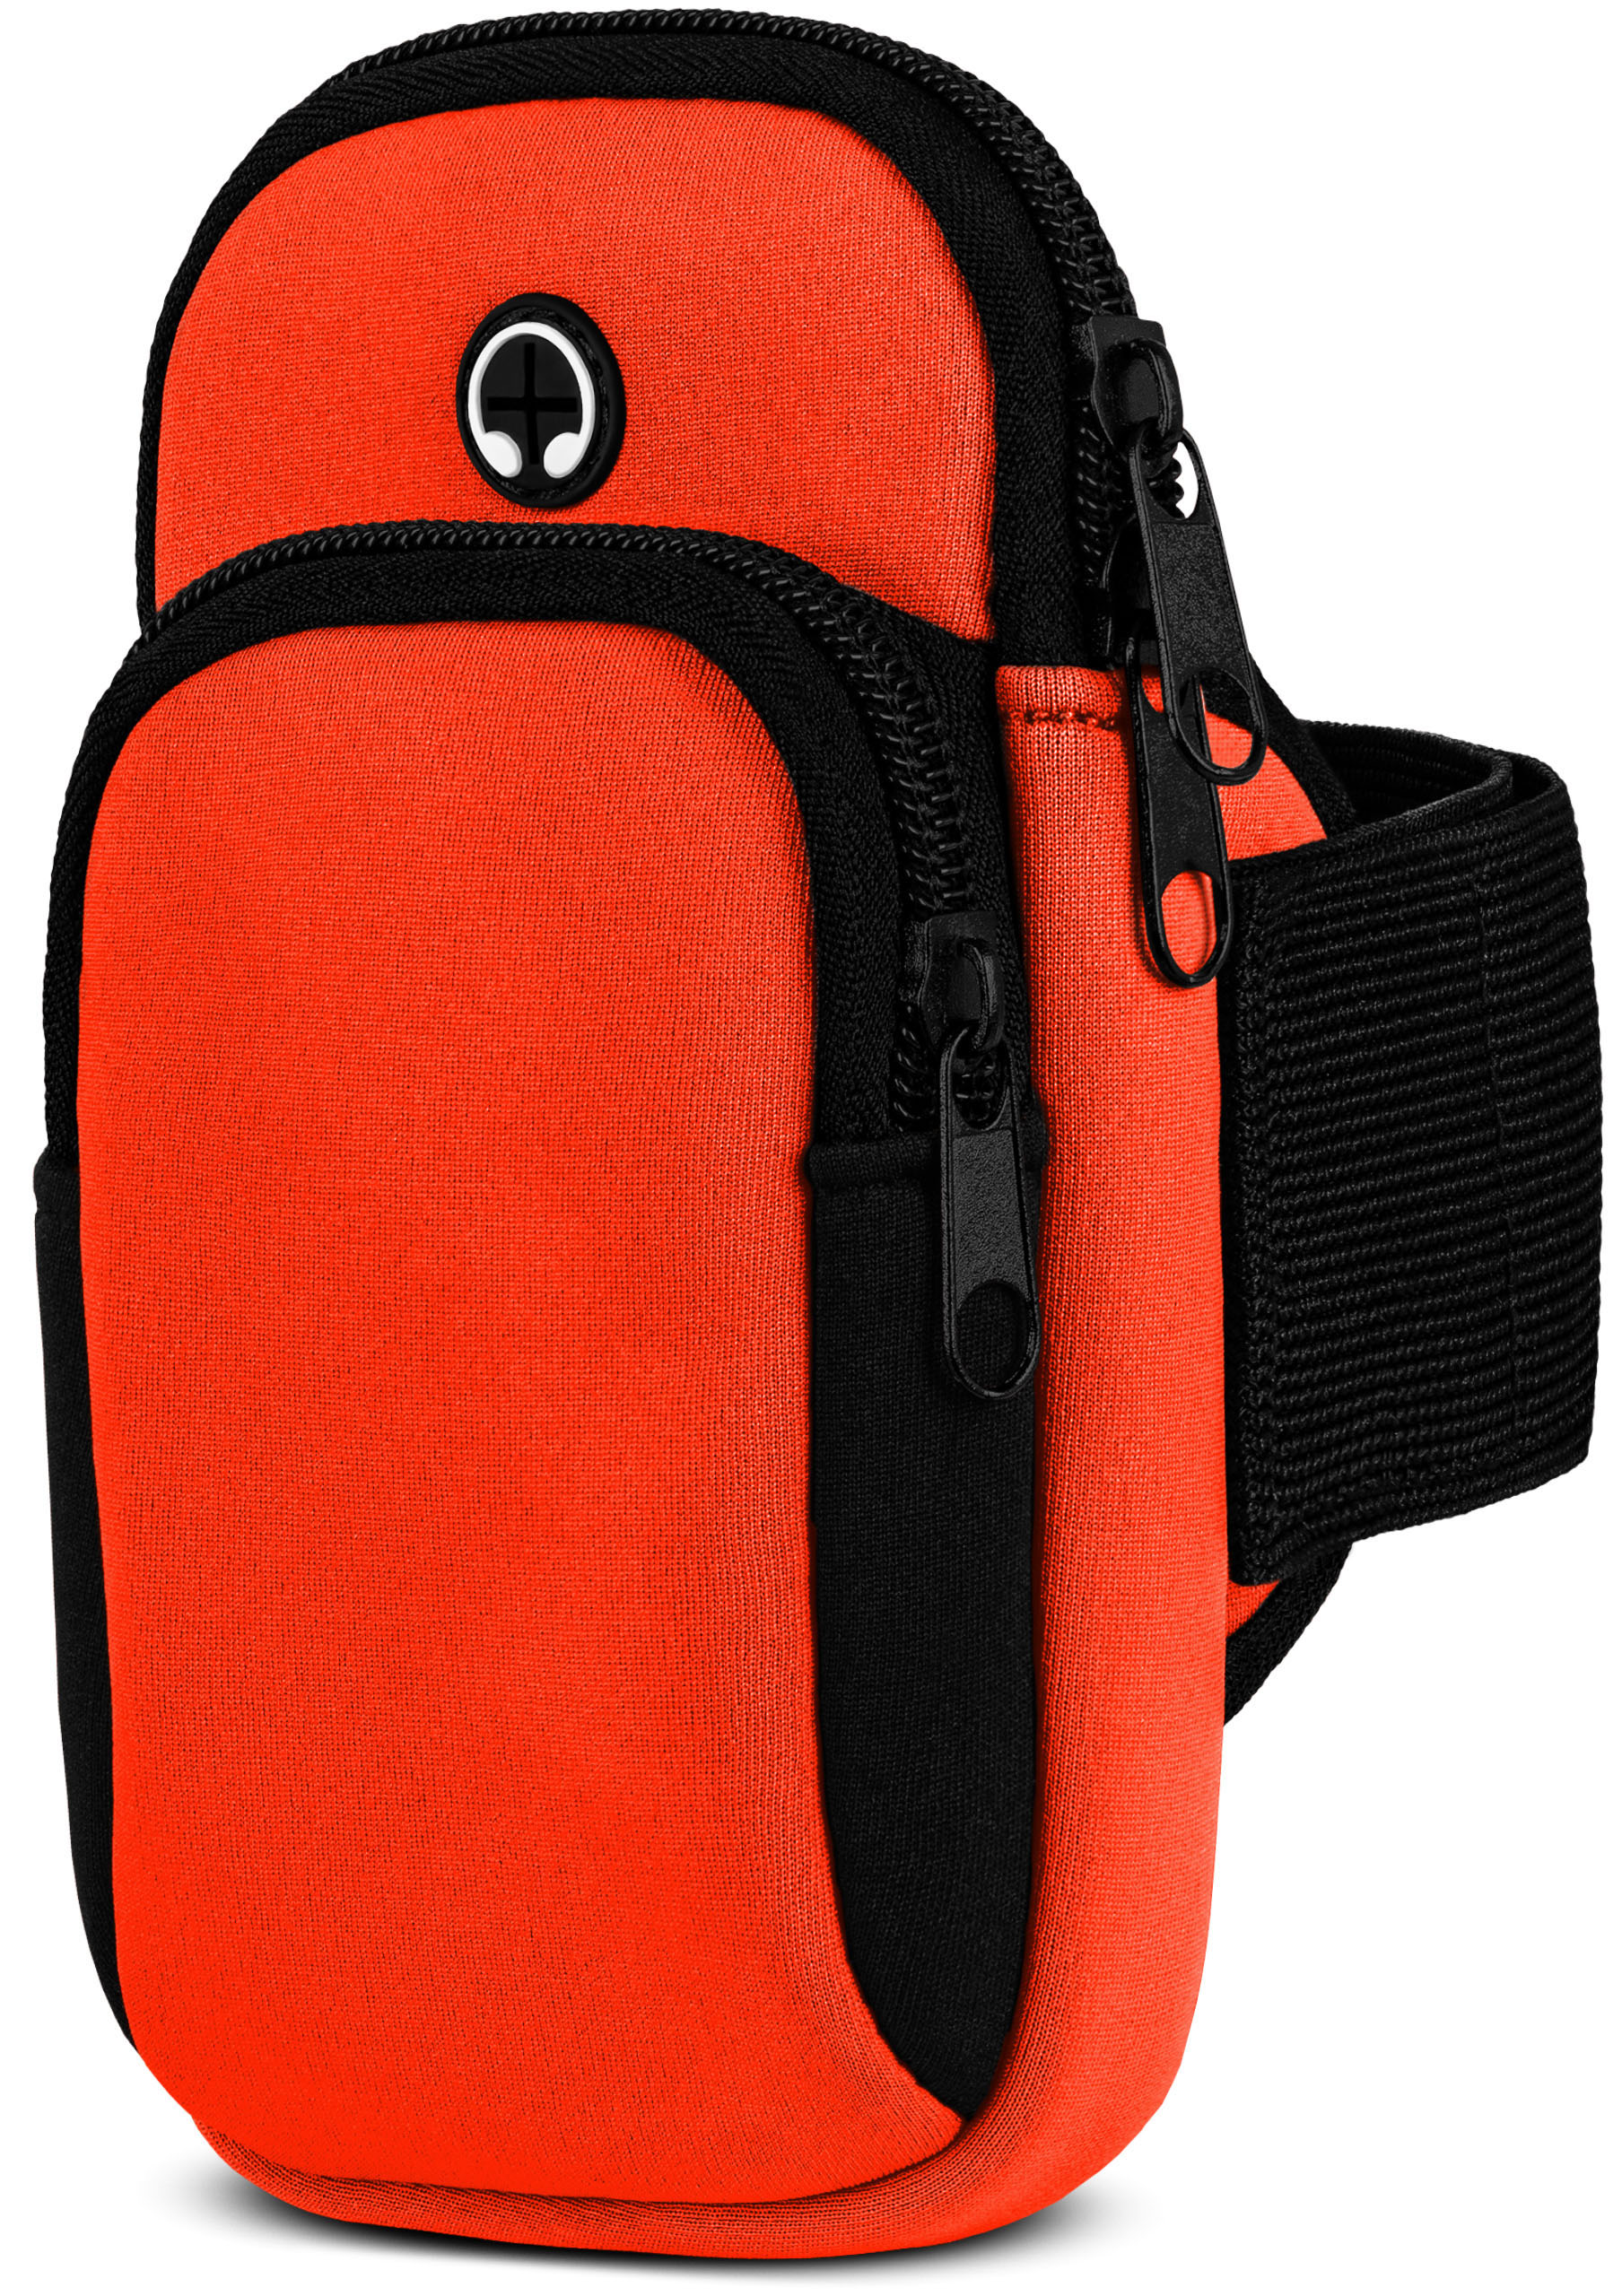 Compact, Cover, MOEX Xperia Sport Sony, Full Orange Z5 Armband,